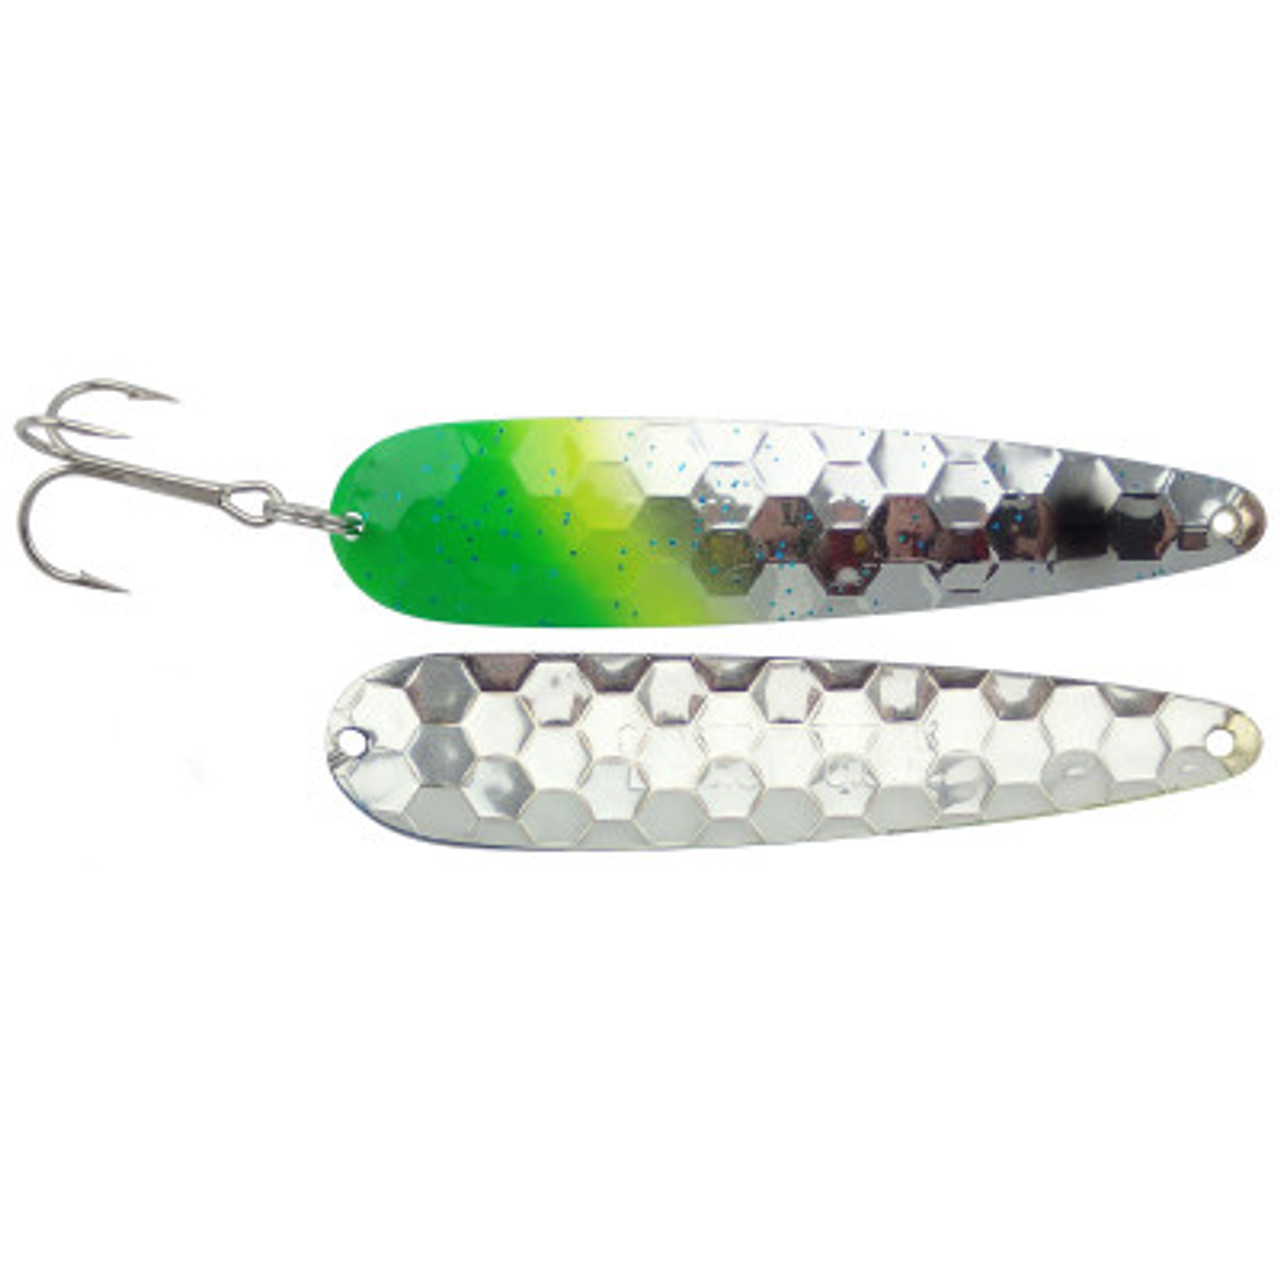 Tee Spoon #5 & Crippled Alewive Salmon Lures - Lot of 3 ($3.00 Shipping) 